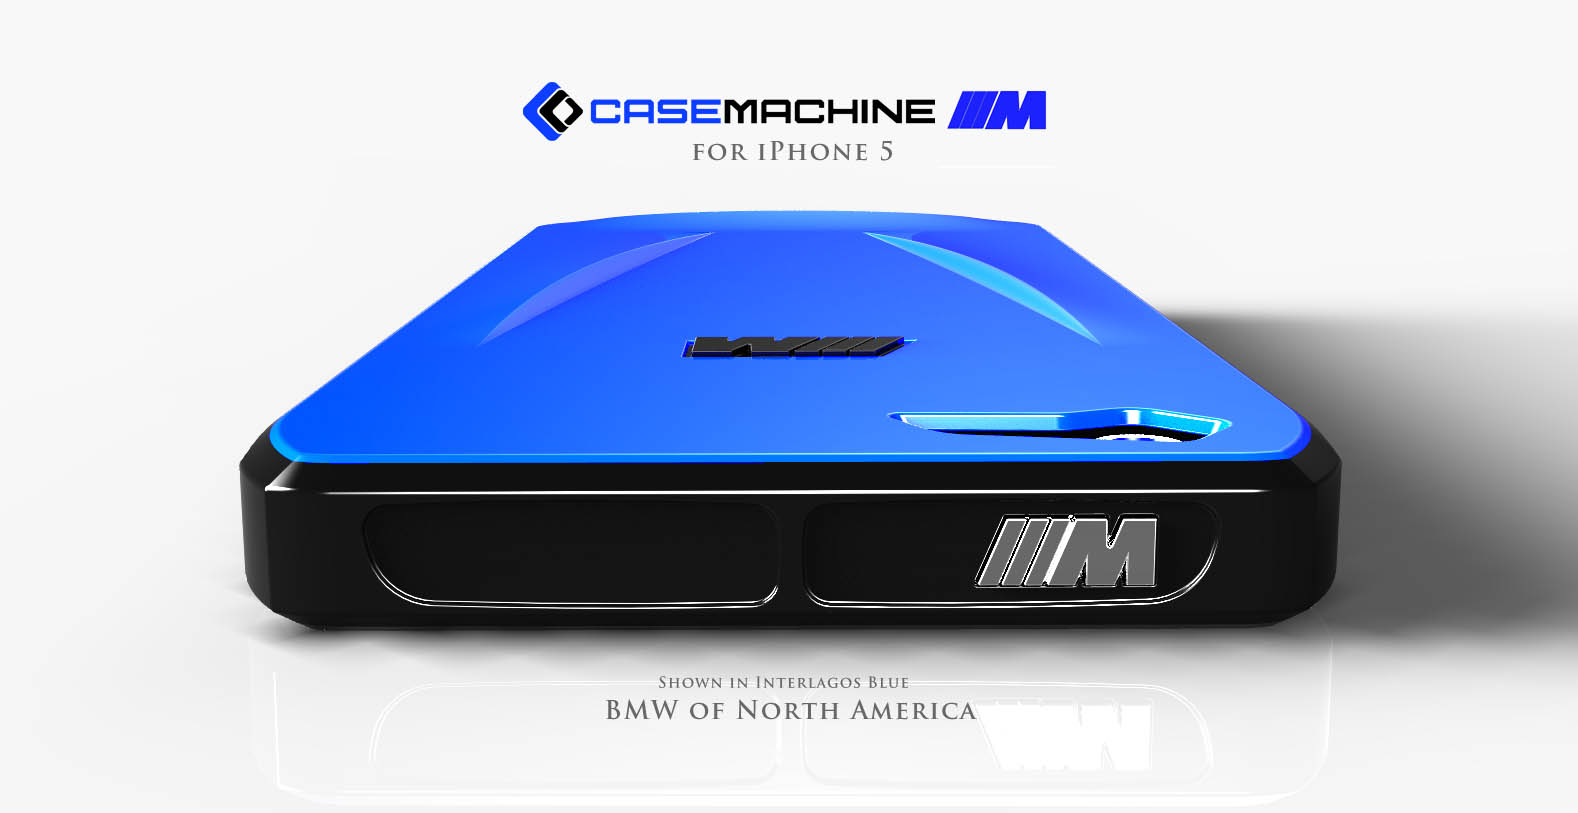 Casemachine's Case Apple iPhone 5 - Innovative, Refined, and Reminiscent